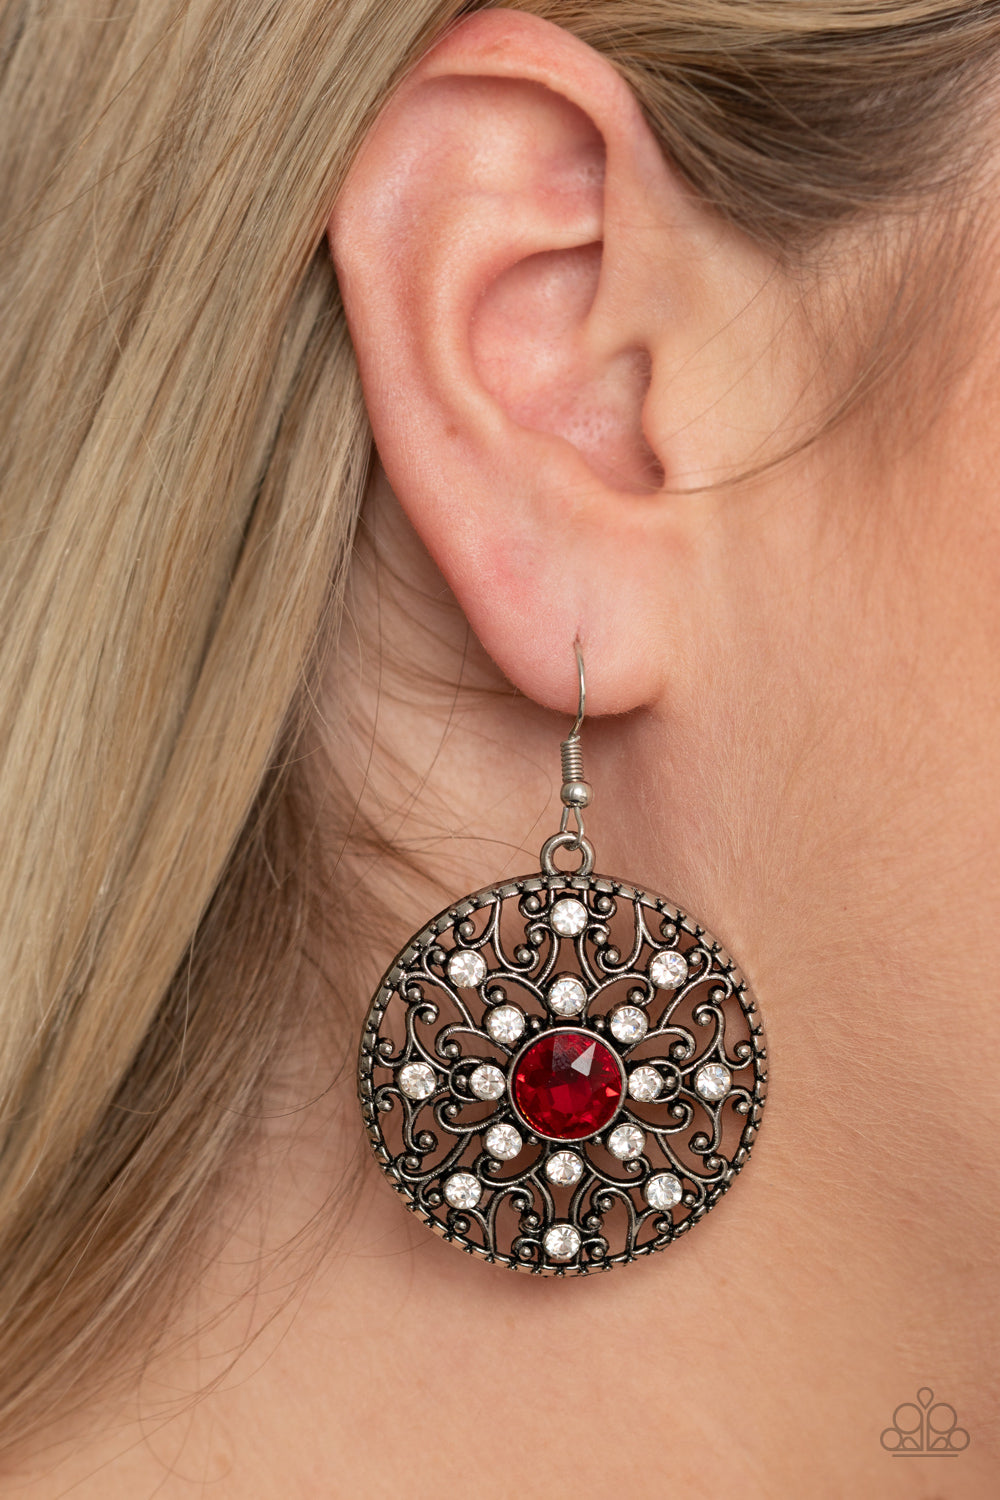 GLOW Your True Colors - red - Paparazzi earrings